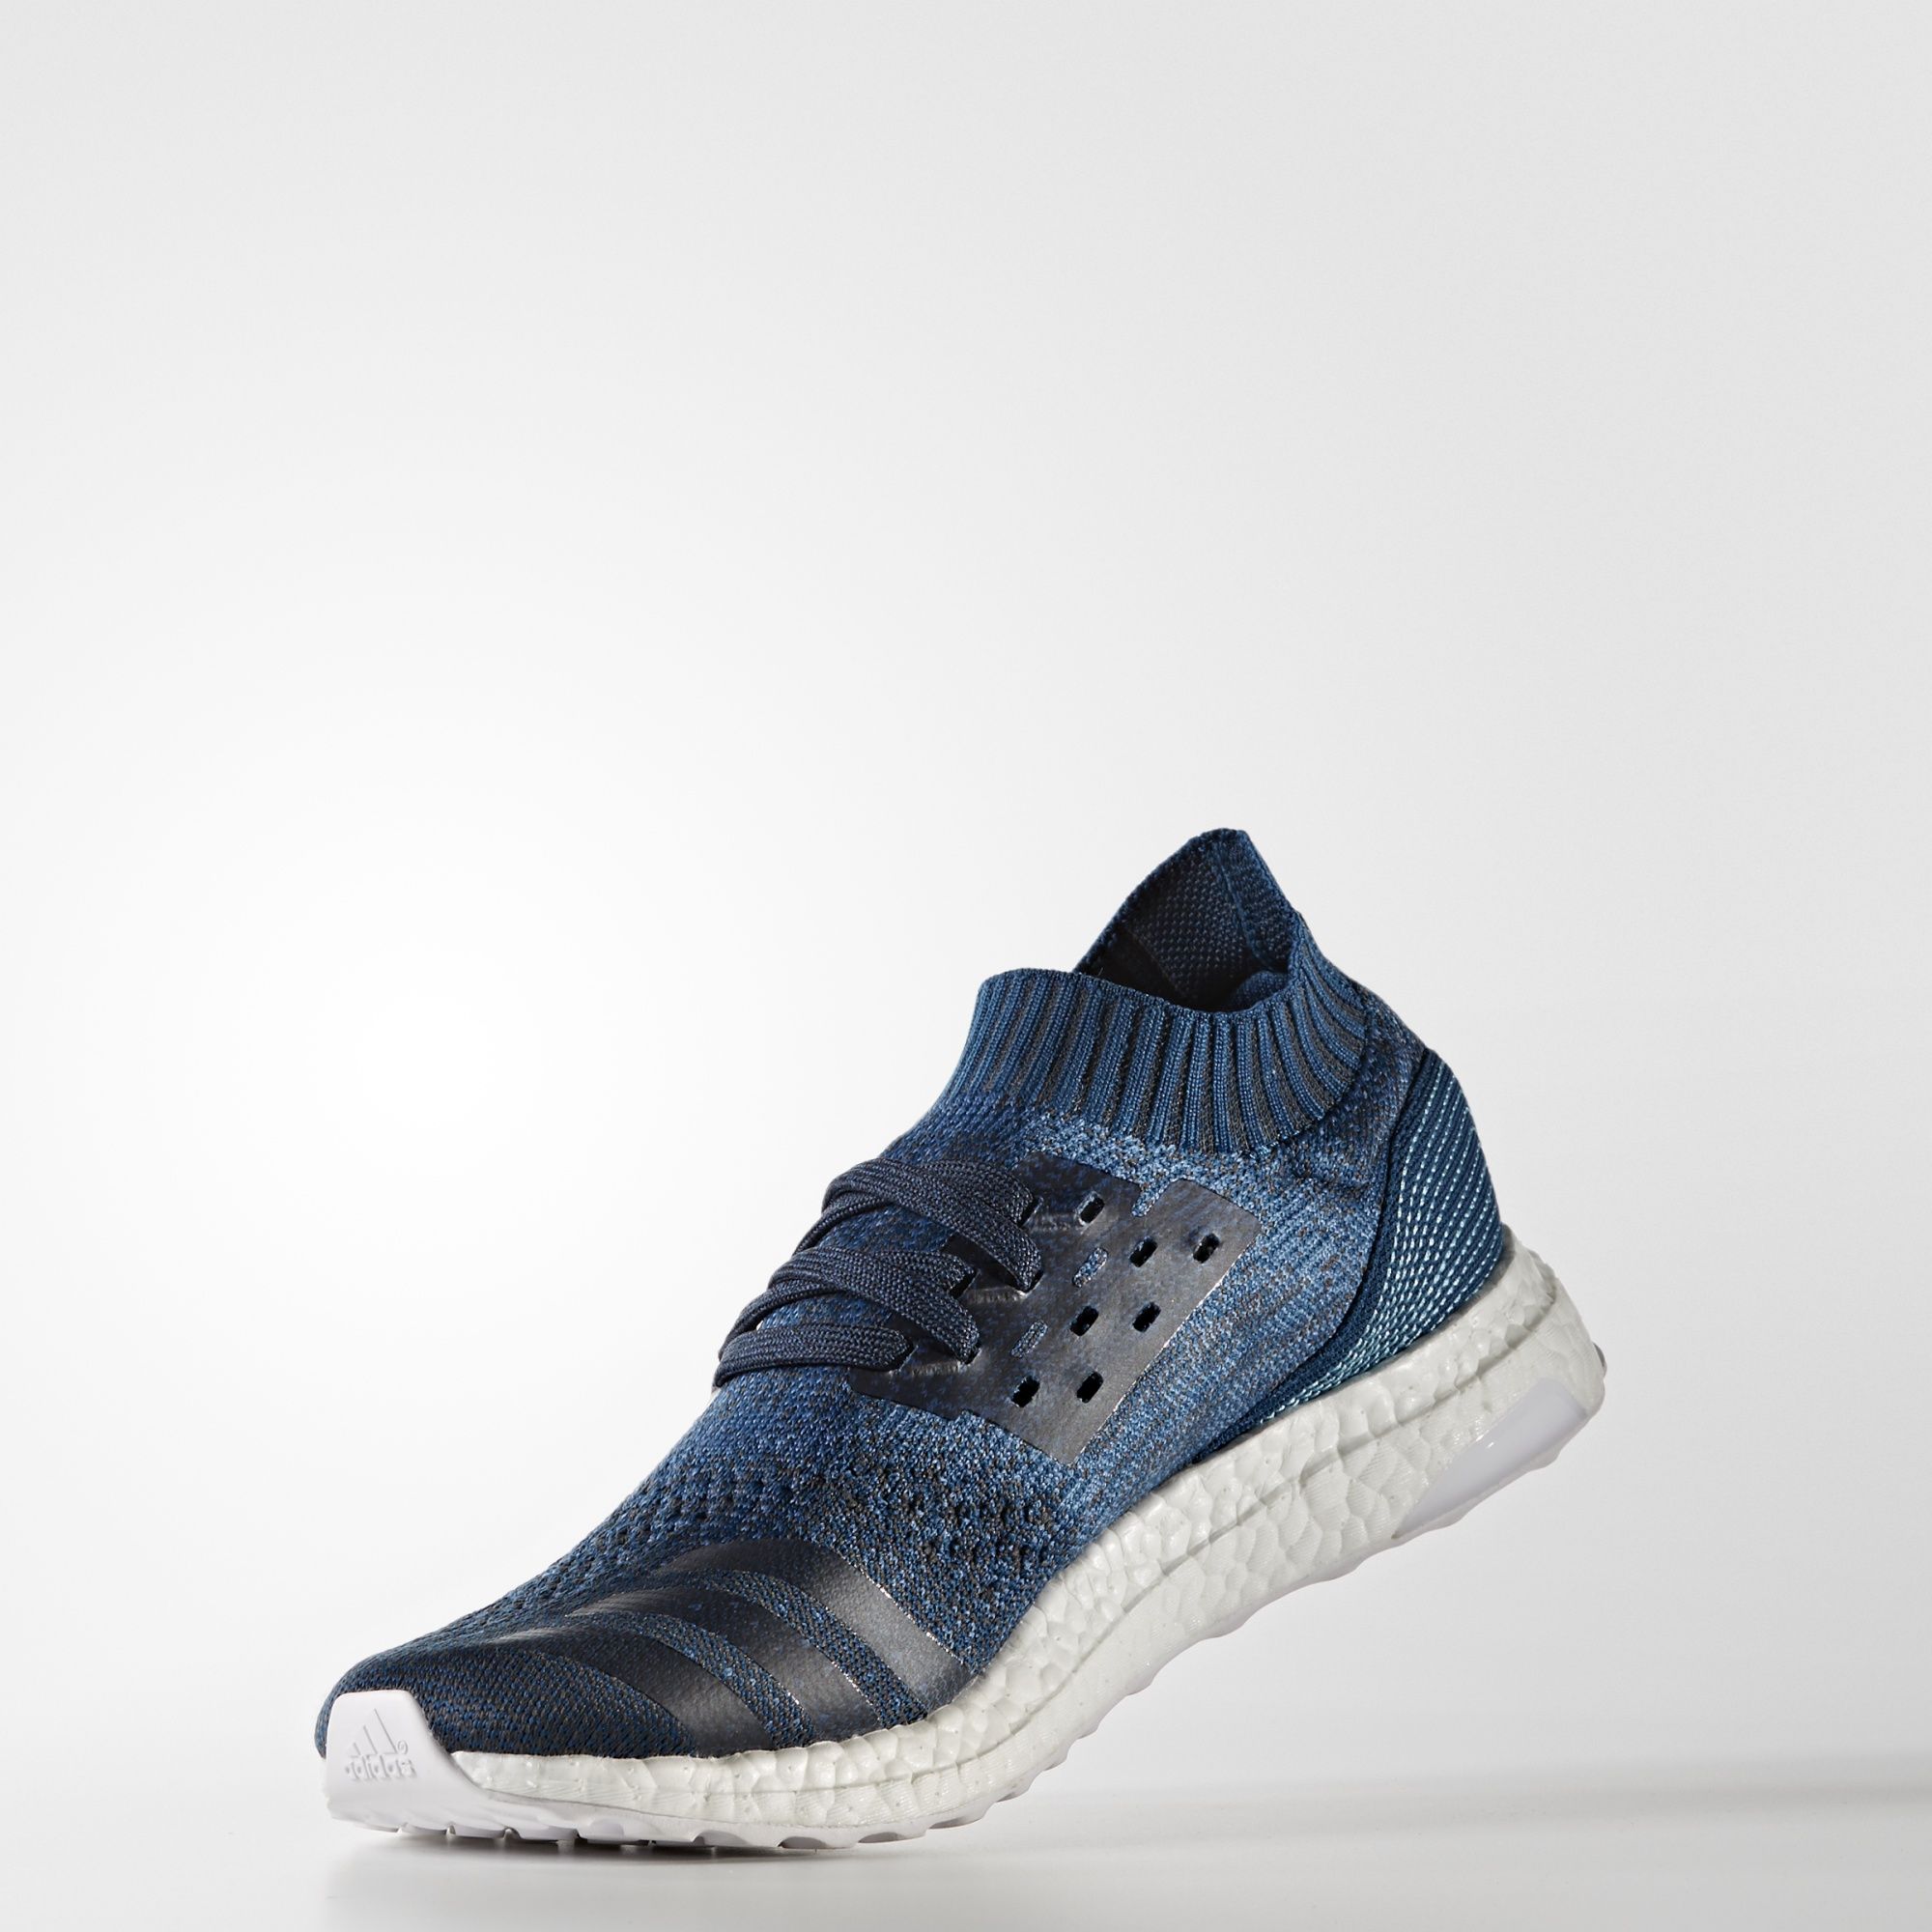 Parley x adidas Ultra Boost Uncaged Legend Blue BY3057 2